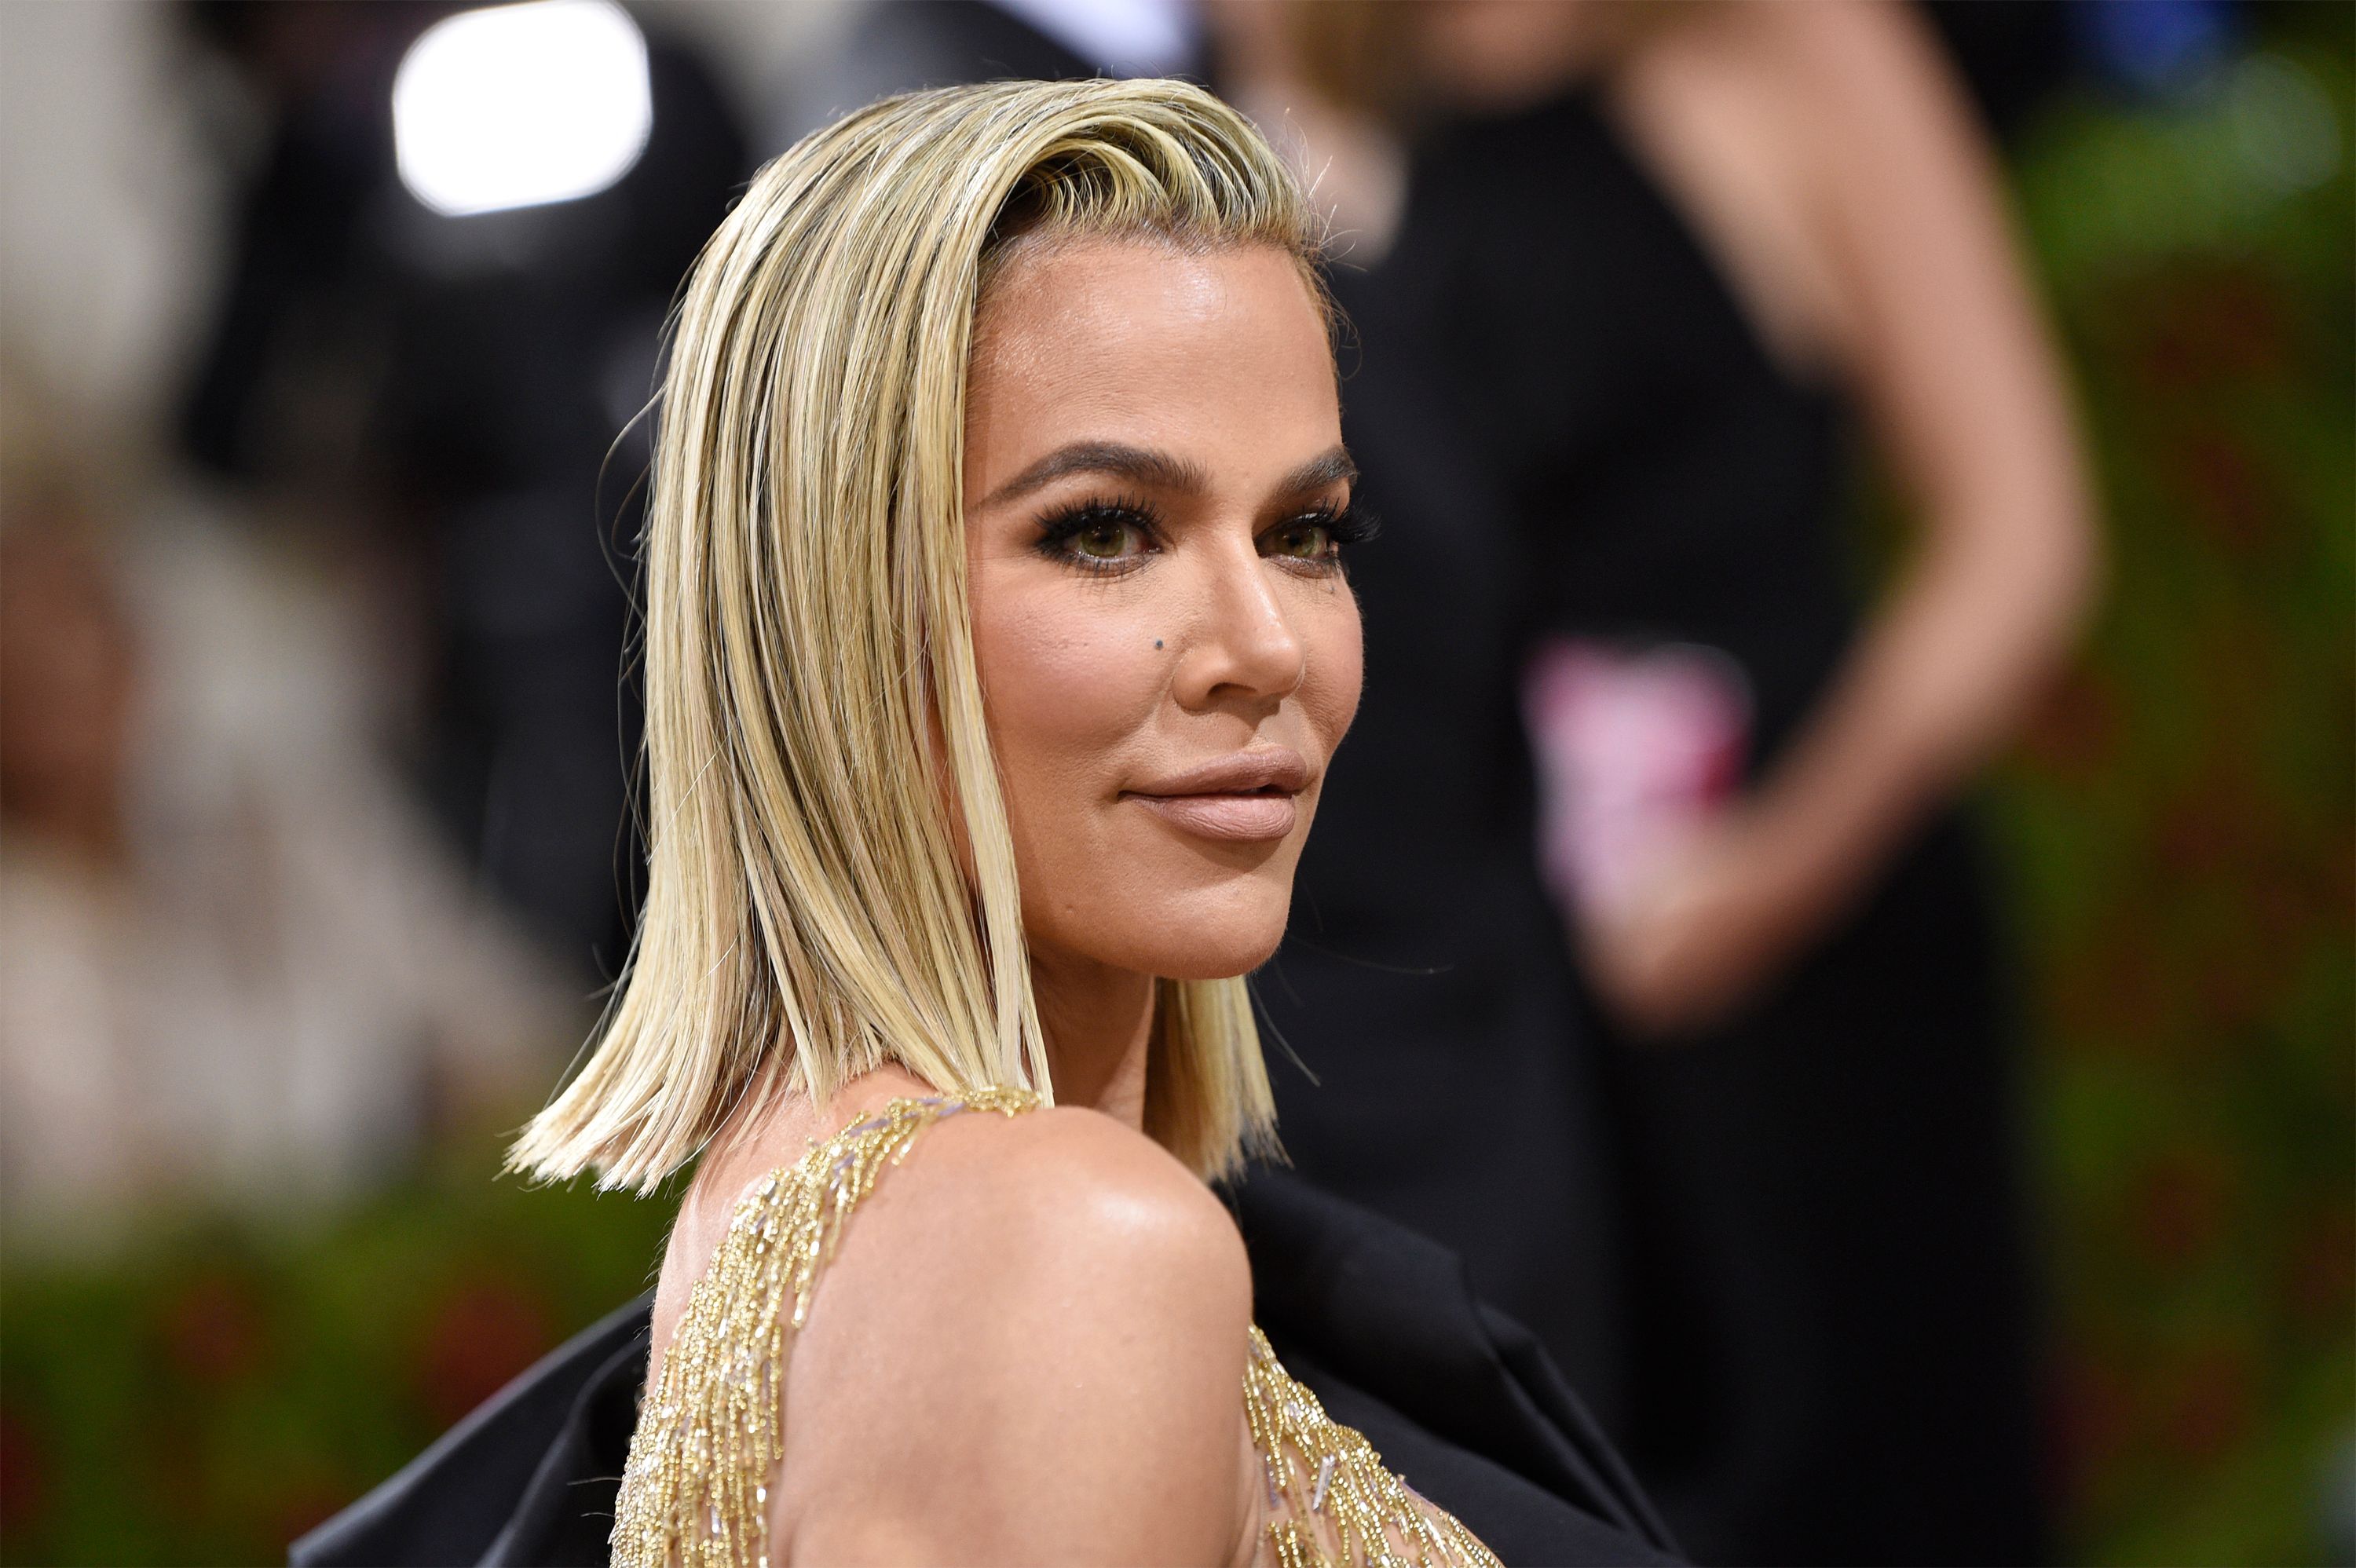 <p>Tristan Thompson did it again. On the June 16, 2022, season finale of "The Kardashians," viewers got to see <a href="https://www.wonderwall.com/celebrity/profiles/overview/khloe-kardashian-622.article">Khloe Kardashian</a> react to learning on-off love Tristan Thompson not only cheated on her -- again -- but got another woman pregnant in 2021. "You either wear a condom, get a vasectomy, or you don't f*** random people that you meet in other states. It's not like, rocket science," Khloe seethed, confirming she found out about the cheating and the baby when the public did.<span> "A courtesy would be not doing it. But fine, if you do it, you're not even going to give me a heads up before the rest of the world?" she said. "It's just an additional slap in my face. It's humiliating. I'm embarrassed." </span>Devastated Khloe also shared in a confessional, "I'm replaying every event. Every grand gesture. Every trip. Every date. Every whatever. All of that was a lie," she said, adding, "Did Tristan have every opportunity to tell me? Yes. Was Tristan going to tell me if there wasn't a baby involved? Absolutely not and that shows a lot about his character. The entire thing is despicable."  Keep reading for all the details of Tristan's latest betrayal...</p>